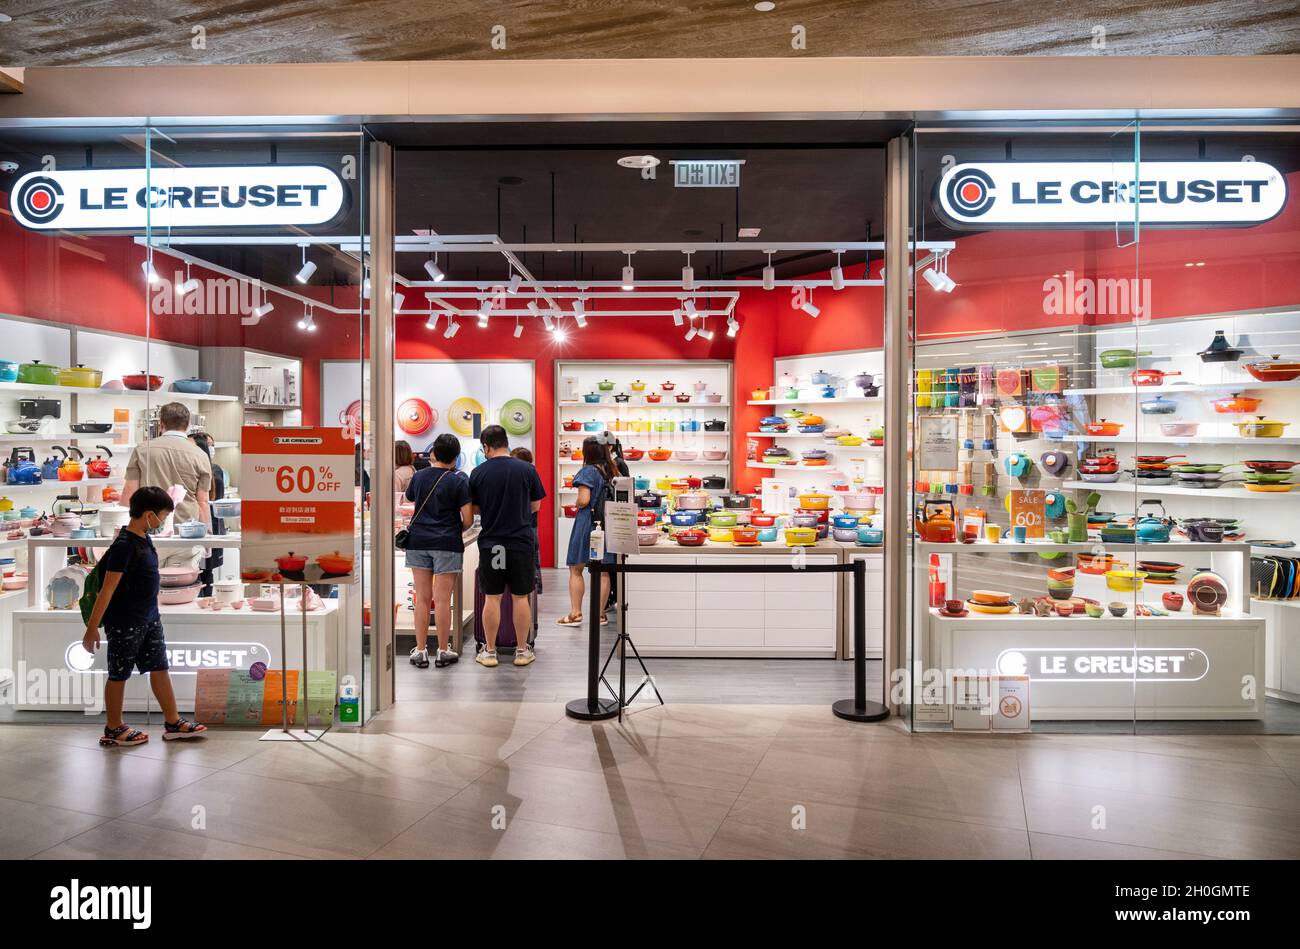 Hong Kong, China. 07th Oct, 2021. Shoppers are seen at the French cookware manufacturer brand Le Creuset store in Hong Kong. (Photo by Budrul Chukrut/SOPA Images/Sipa USA) Credit: Sipa Live News